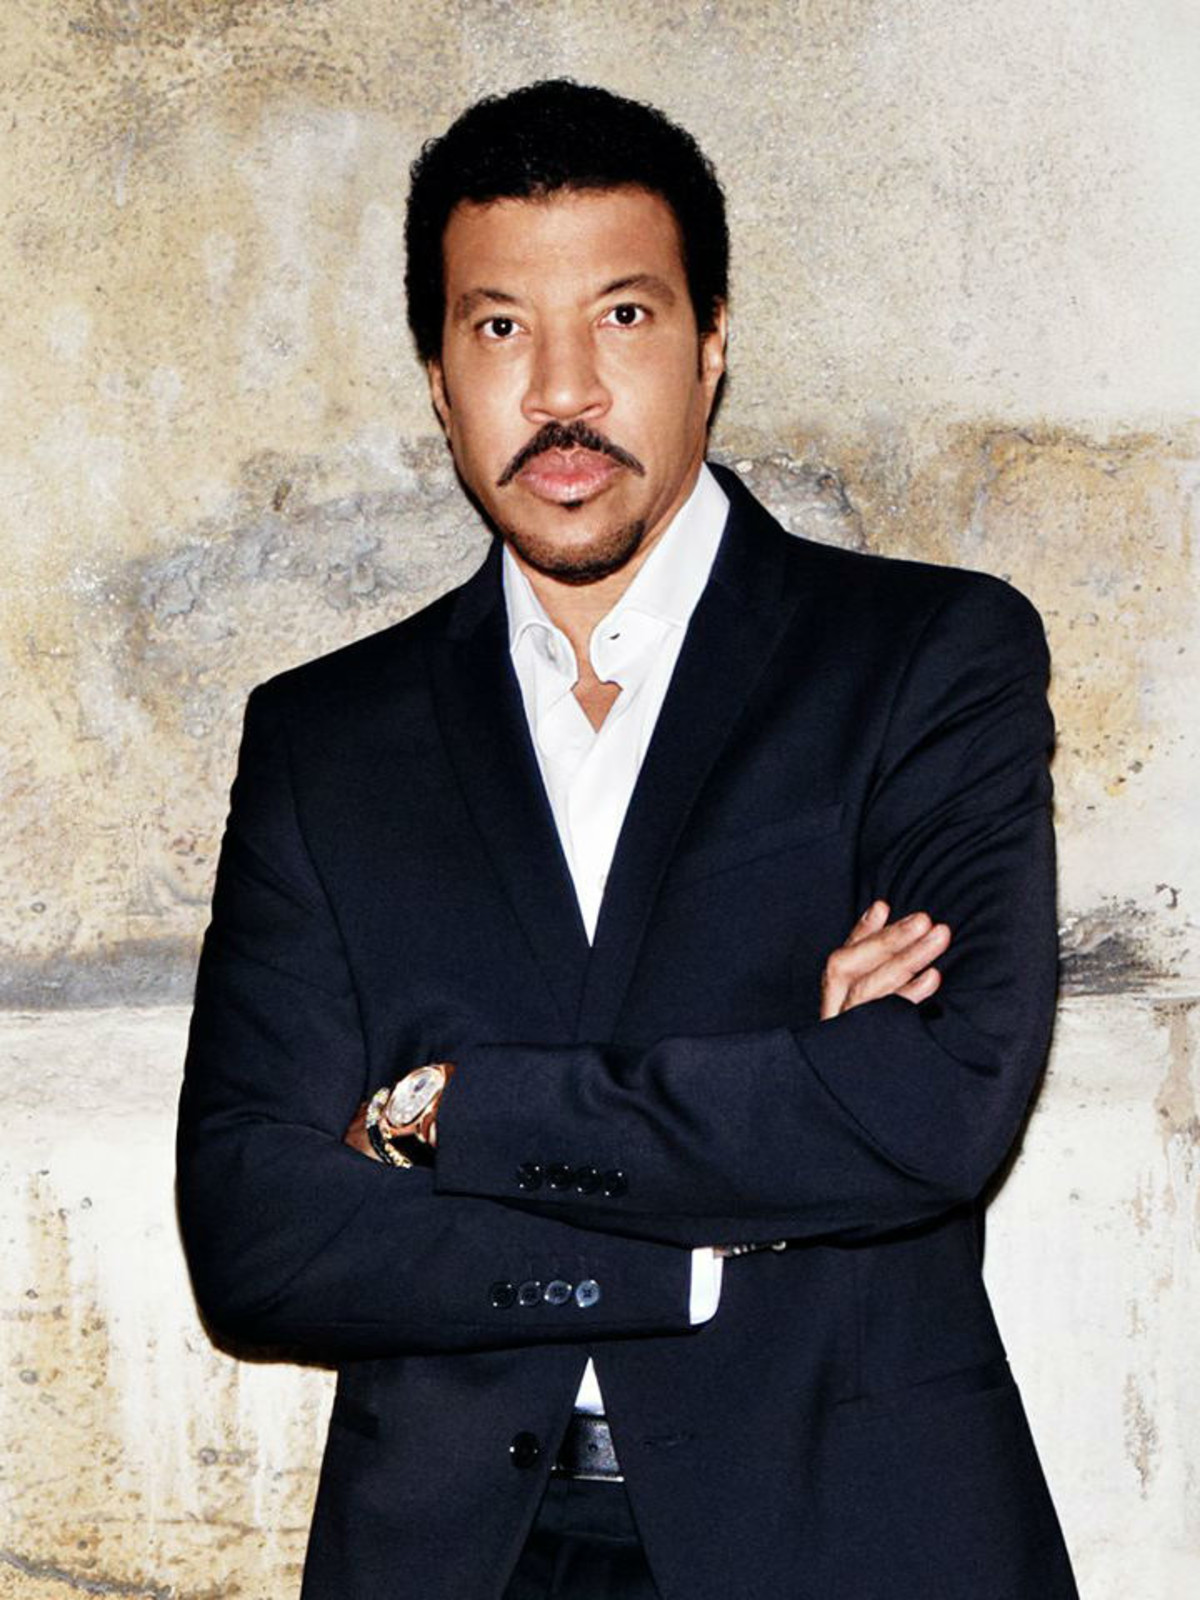 Lionel Richie intends to go all night long during Dallas tour stop